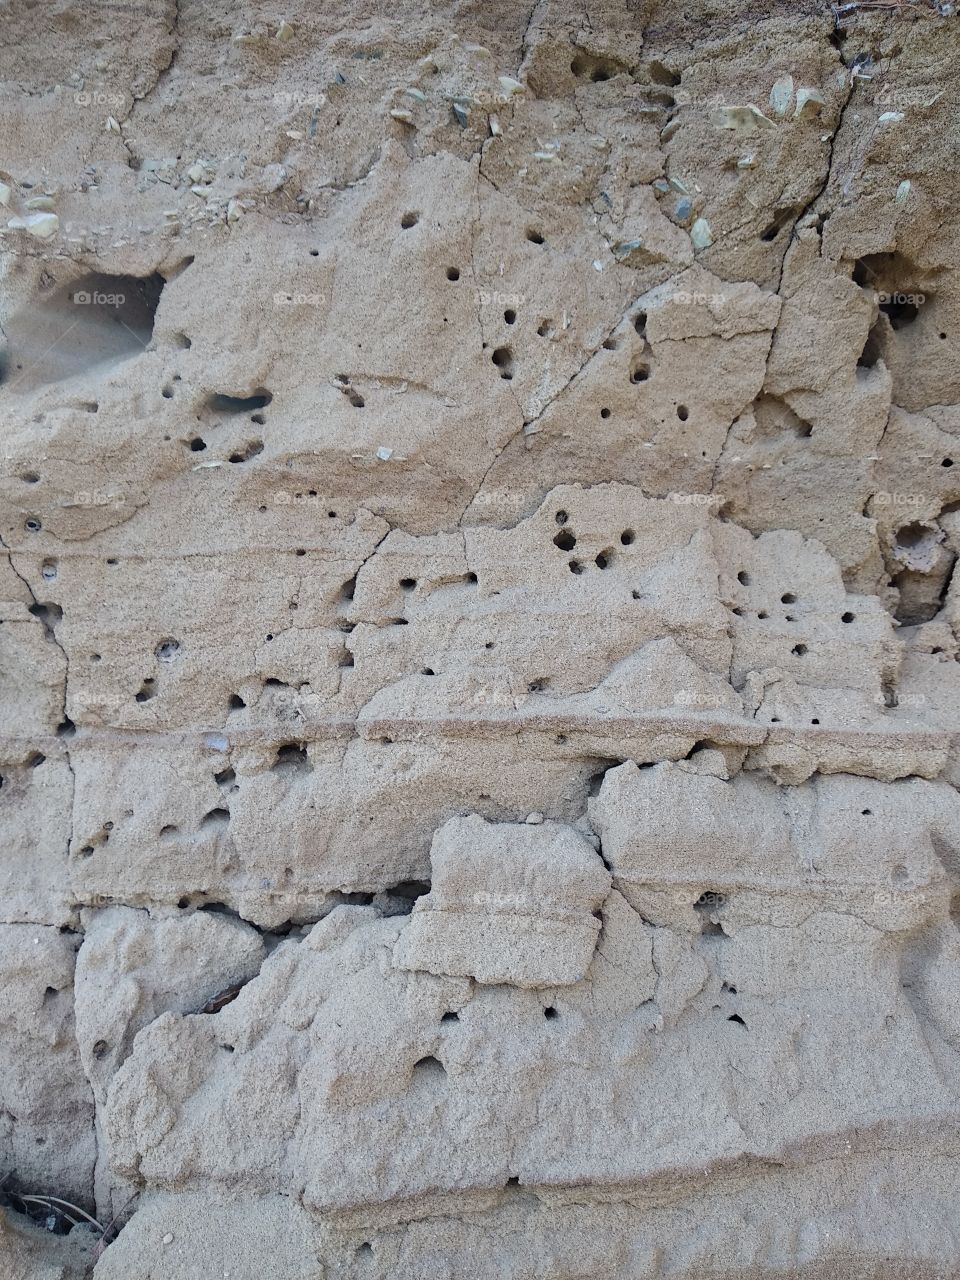 cliff with insect nests